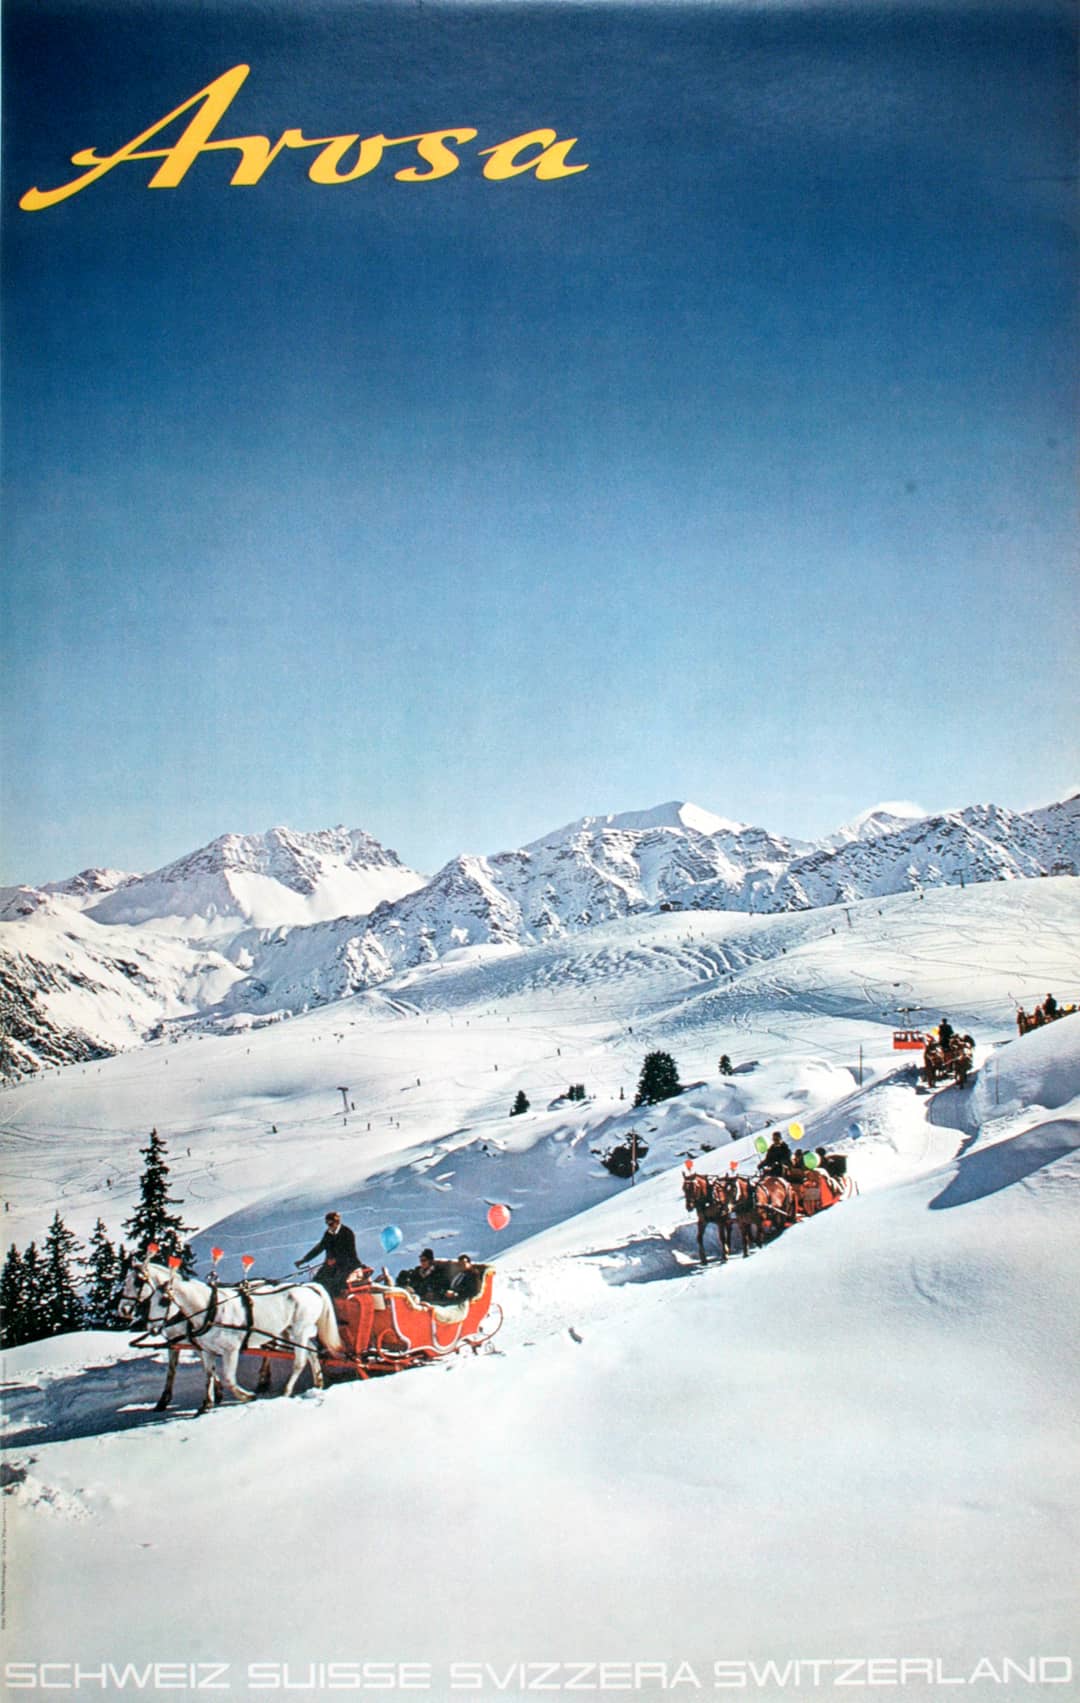 Original Swiss 1970's Poster for Arosa Sleds on a Mountain